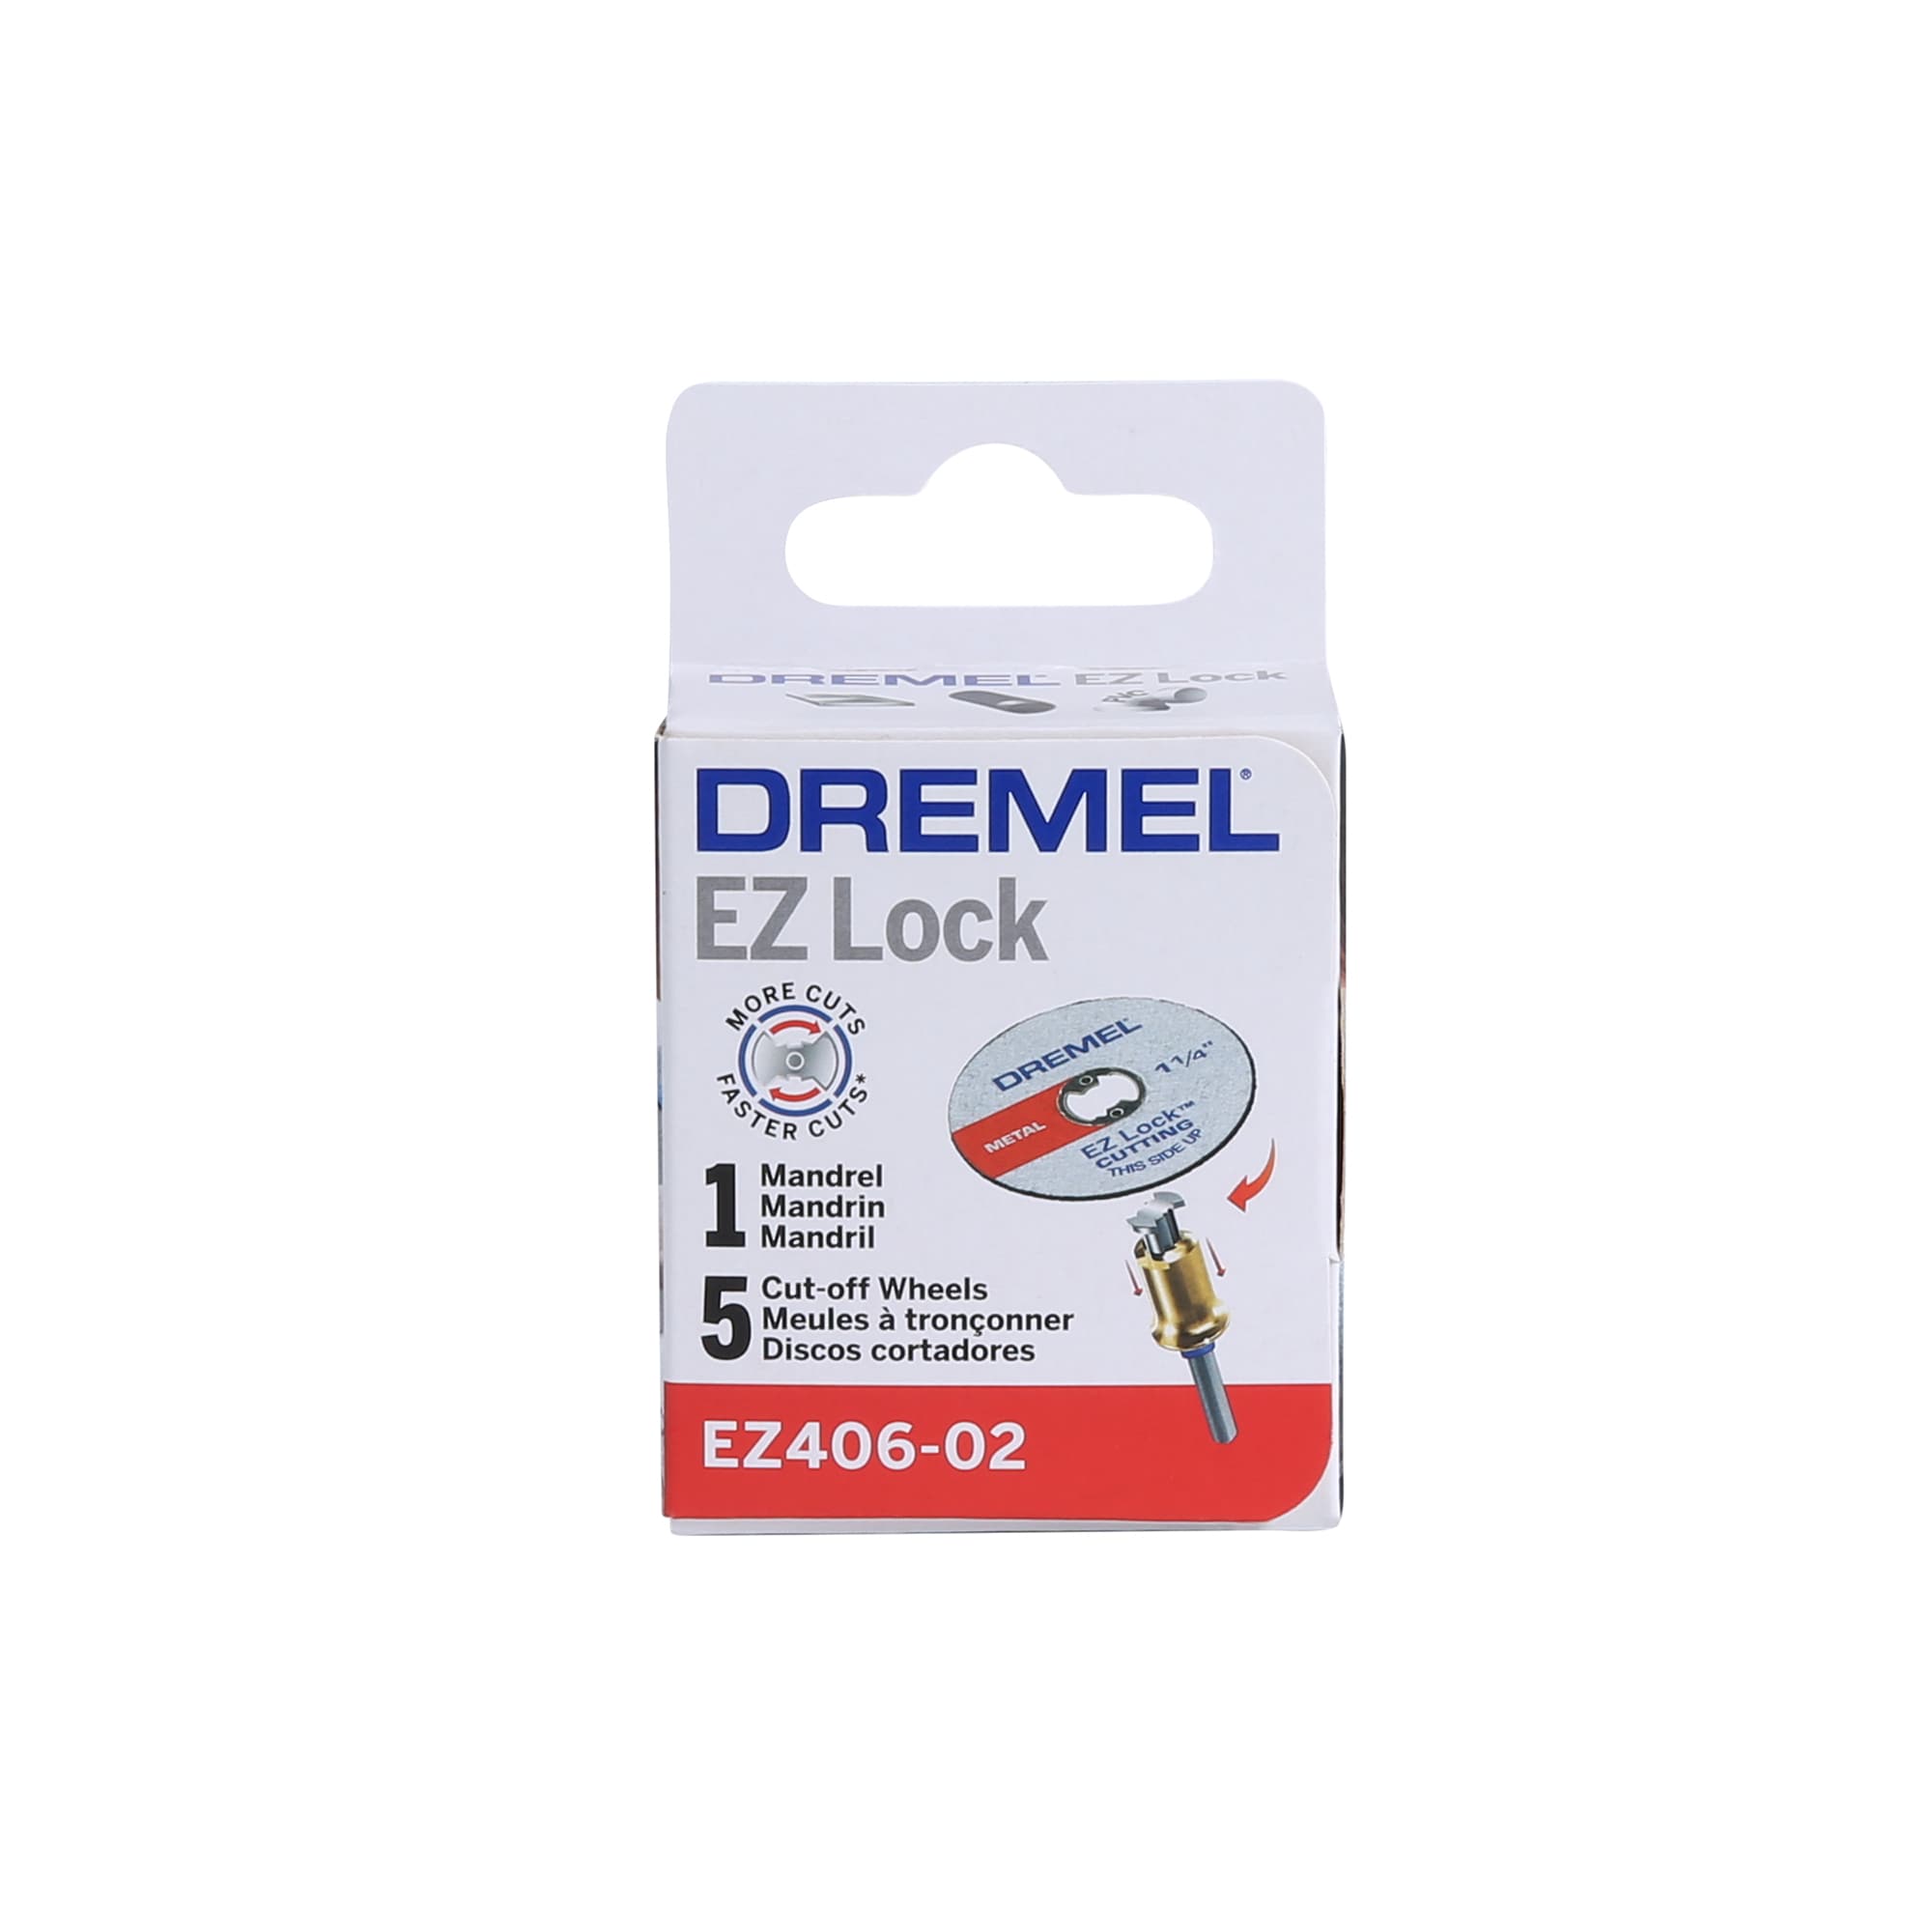 Dremel 20-Piece Steel 1-1/4-in Multipurpose Accessory Kit Accessory Kit at